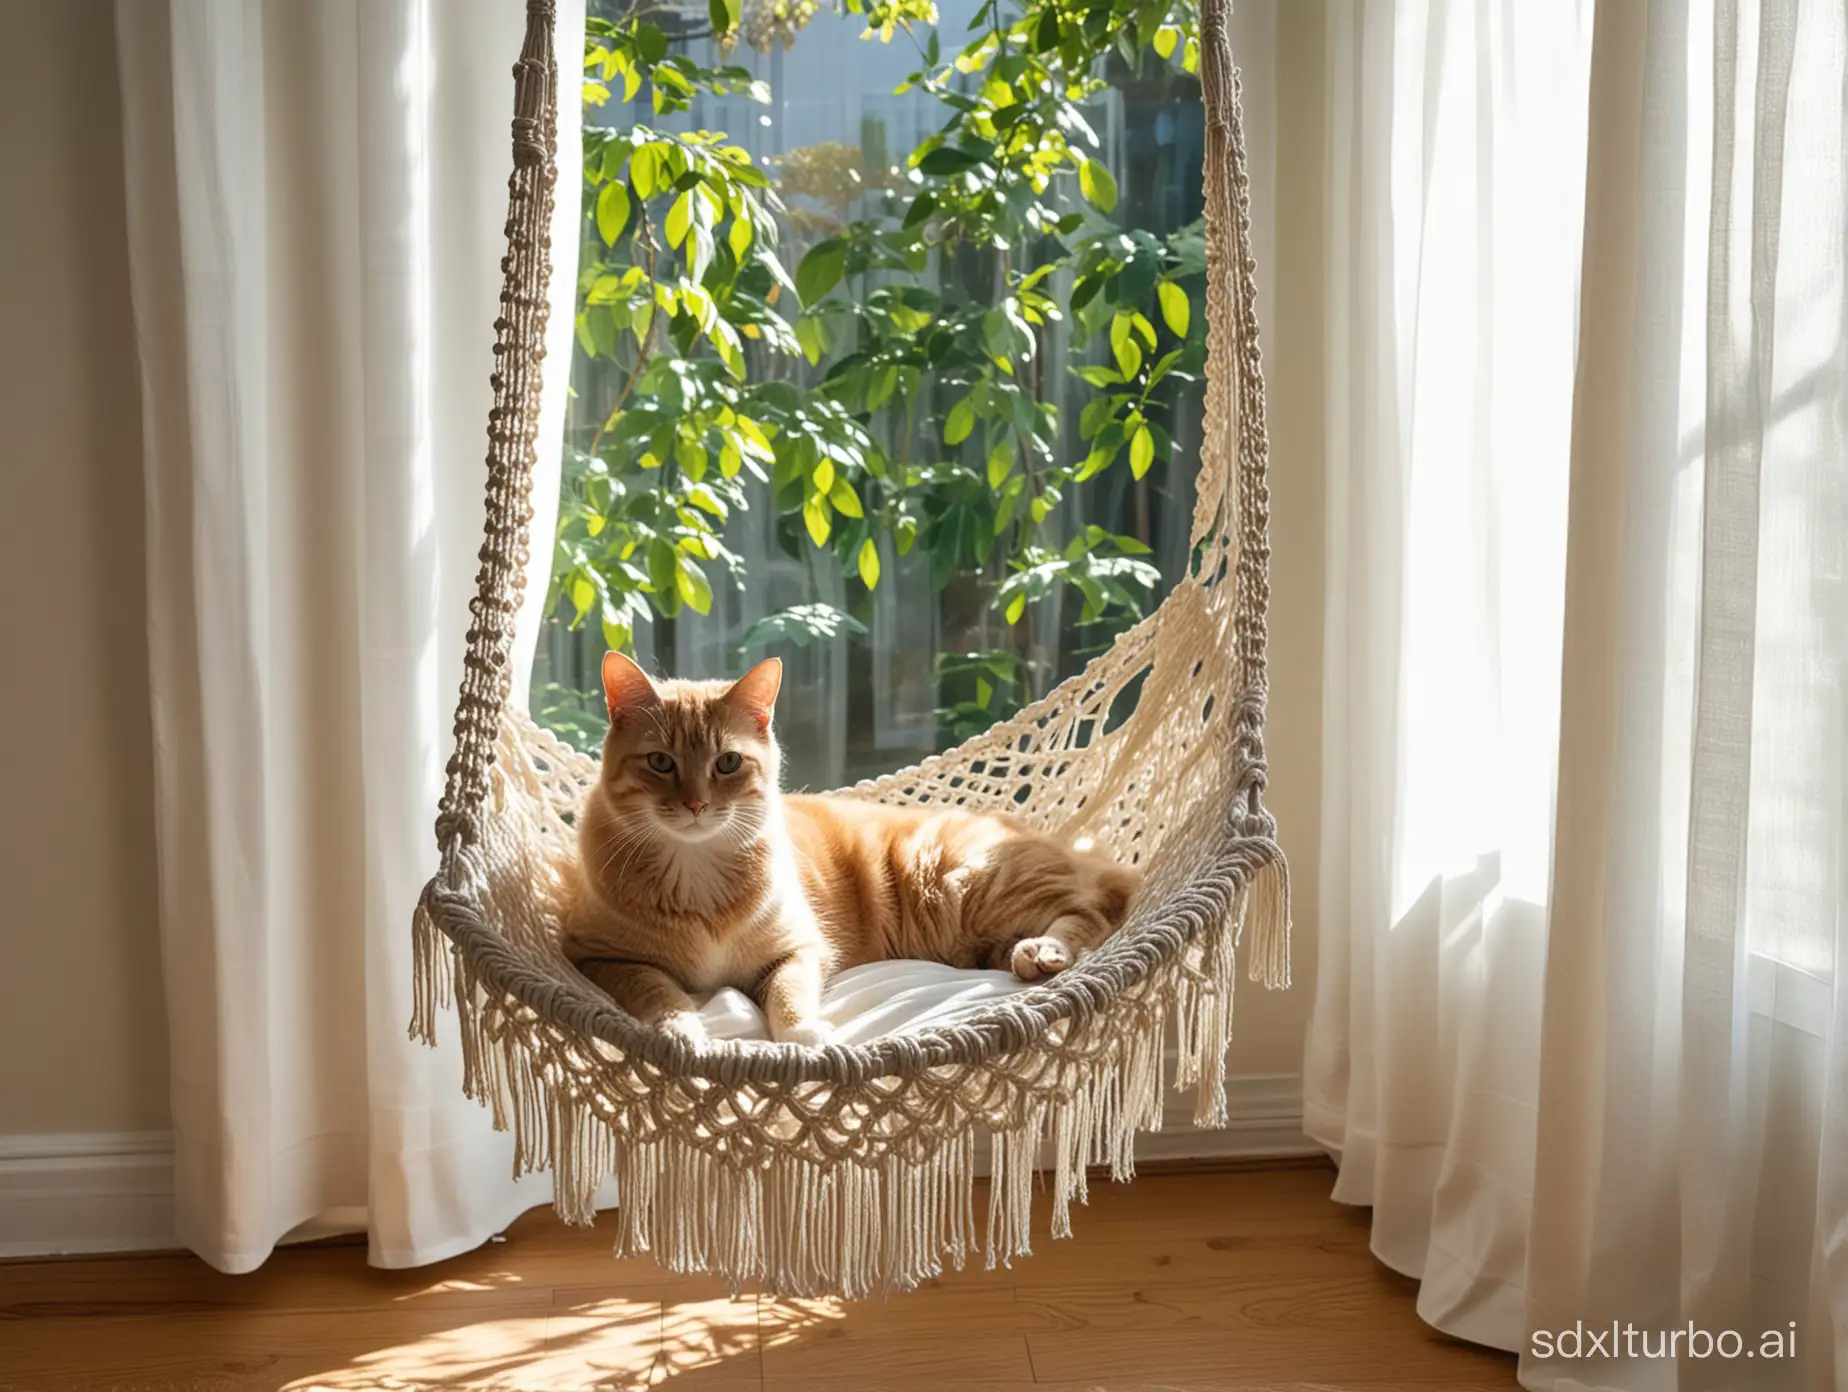 macrame cat hammock the curtains are blowing , sunshine tree shadow